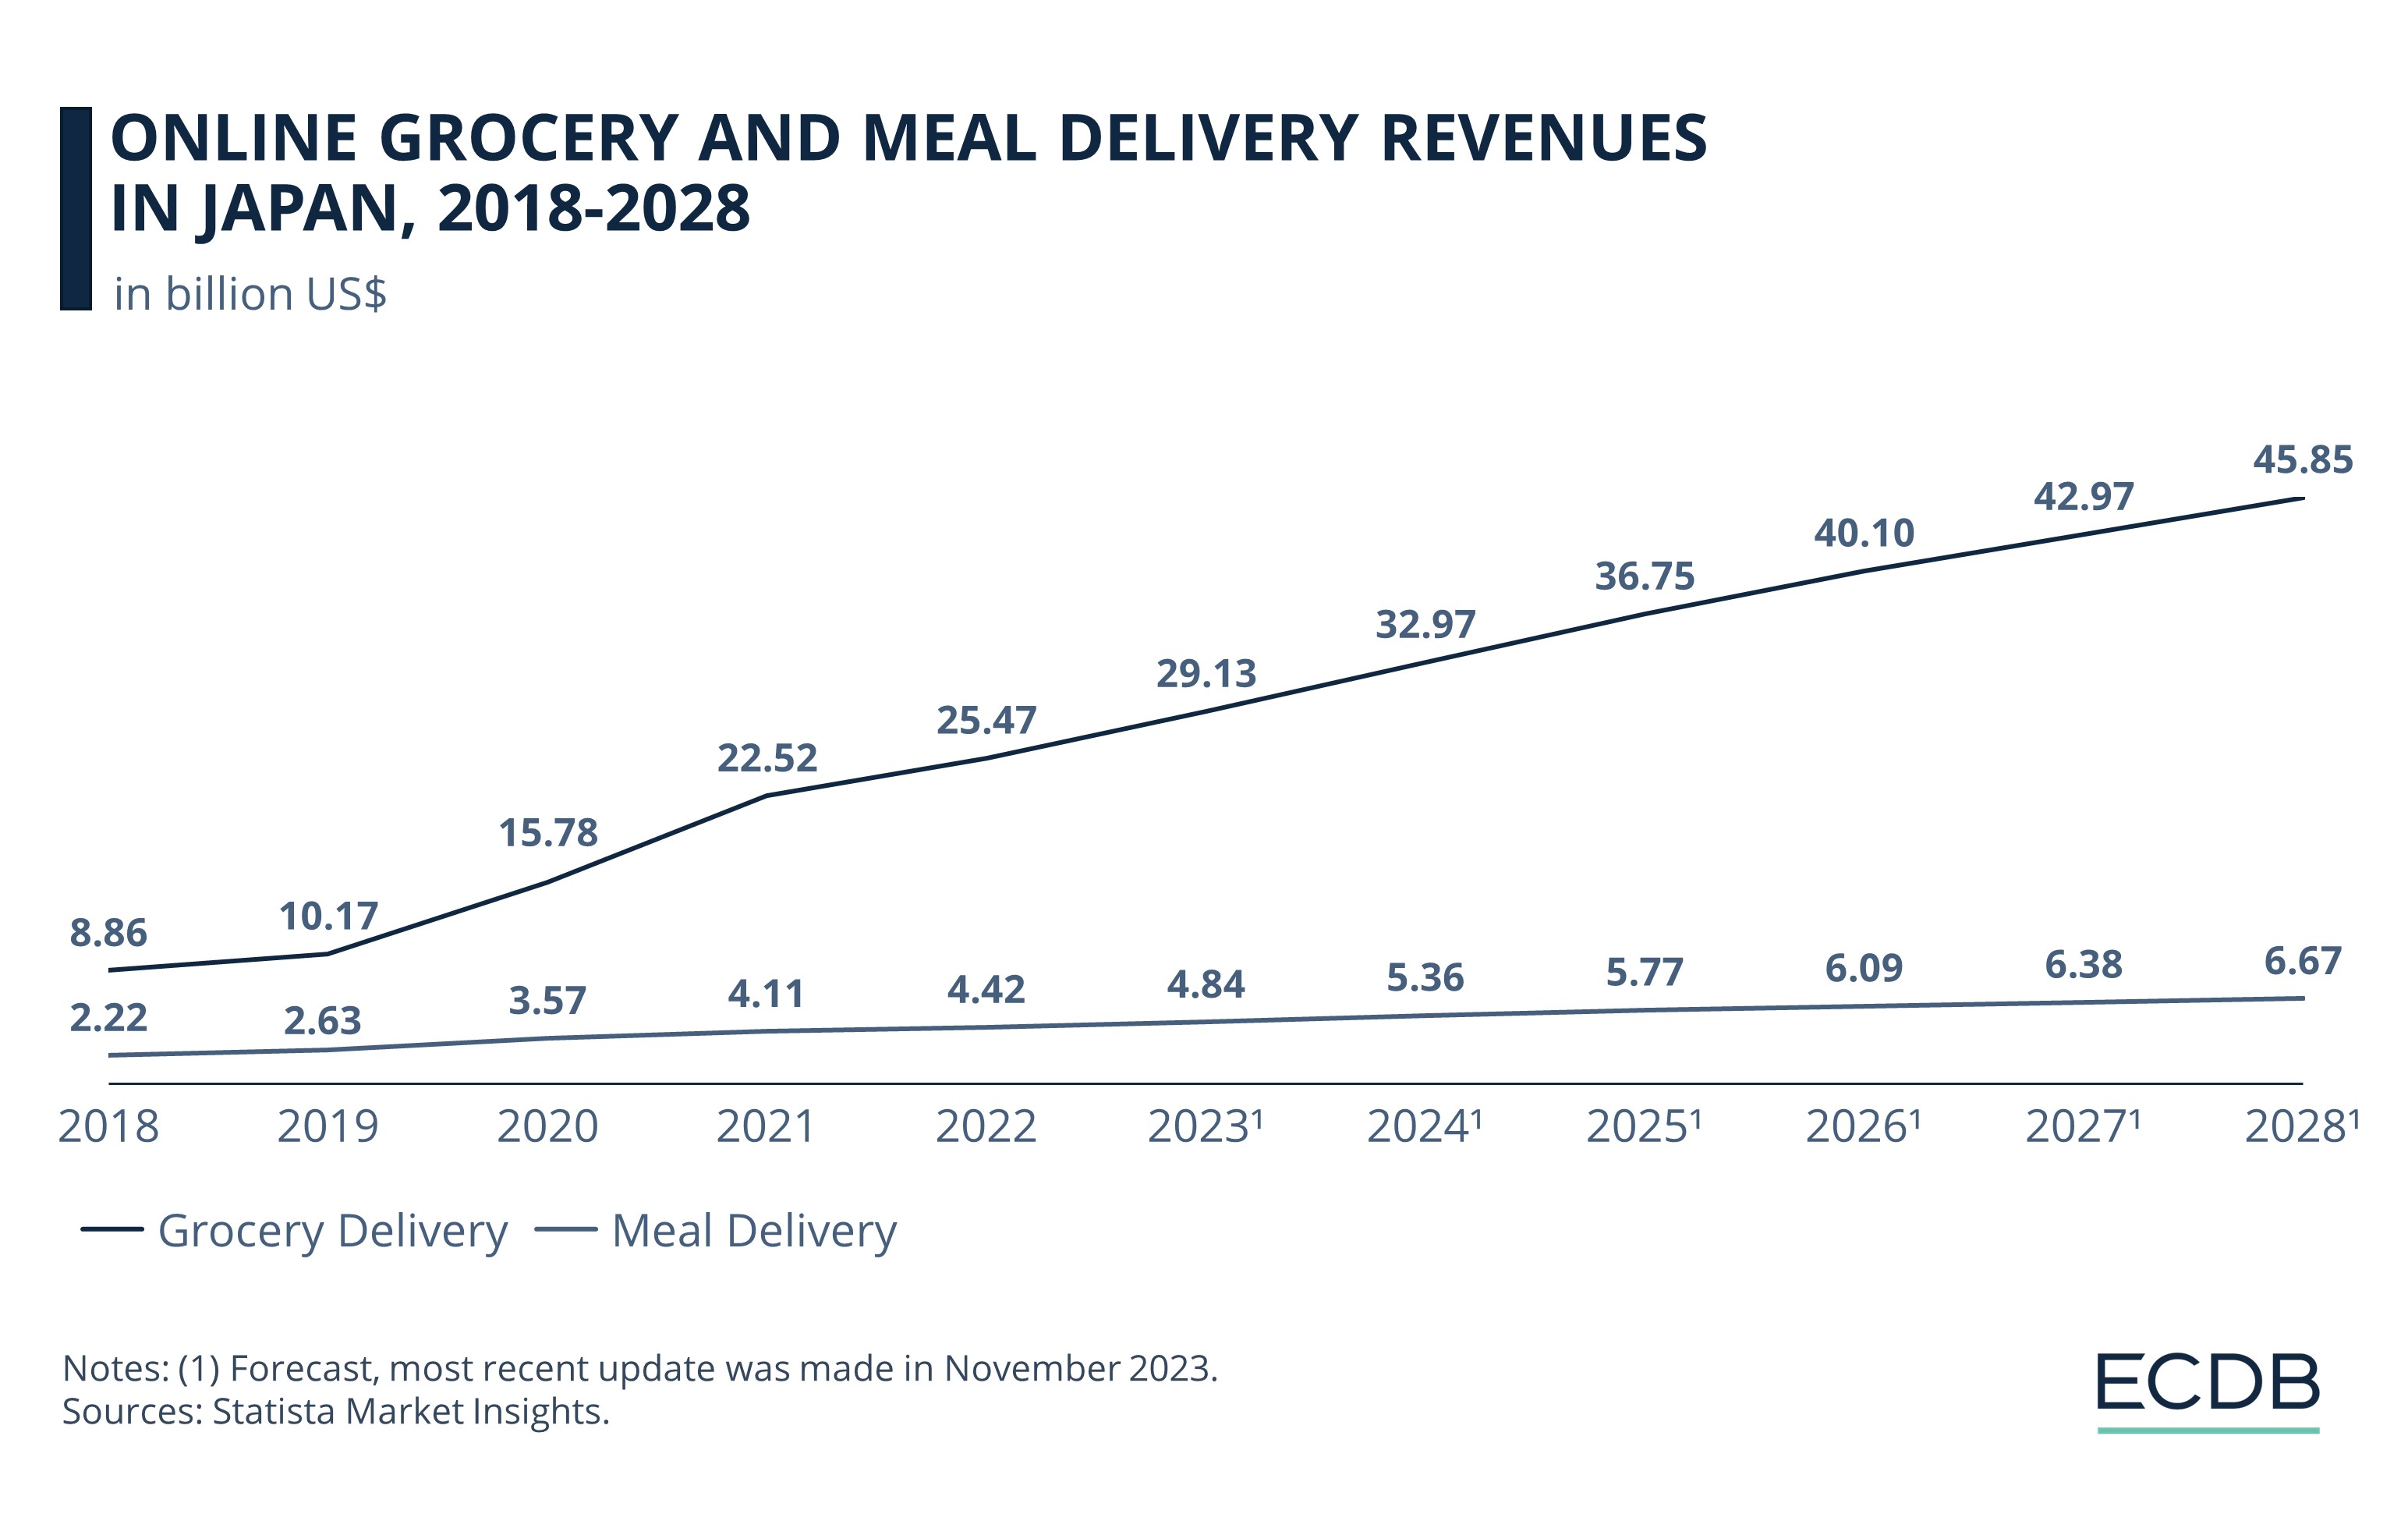 Online Grocery and Meal Delivery Revenues in Japan, 2018-2028